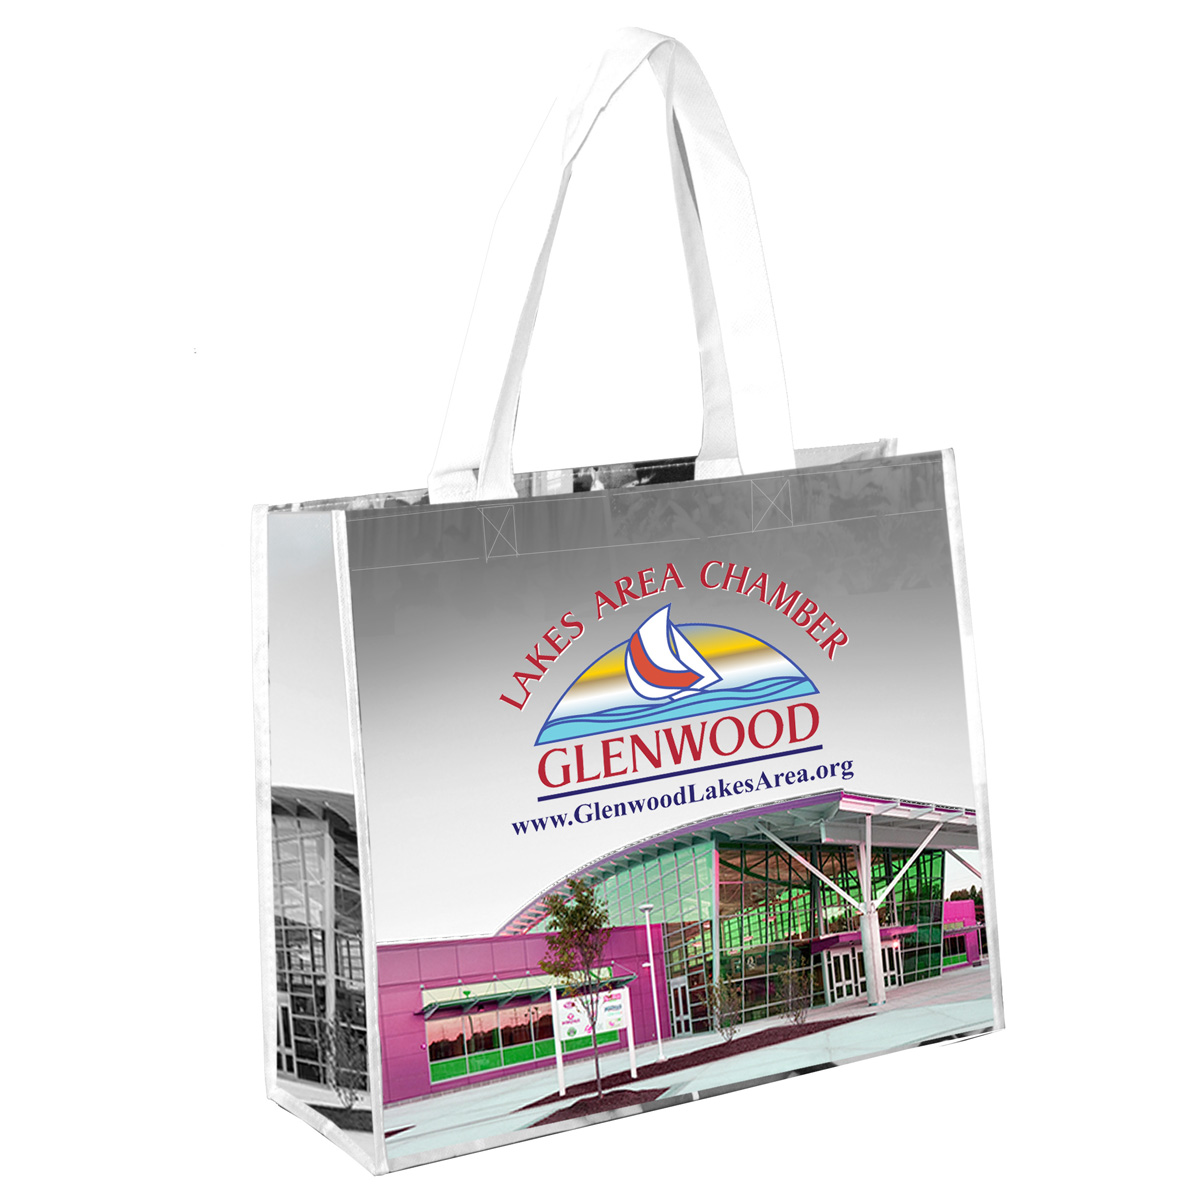 12-3/4" H x 15" W - "MARGARET" Non-Woven Full Color Laminated Wrap Carry All Tote and Shopping Bag